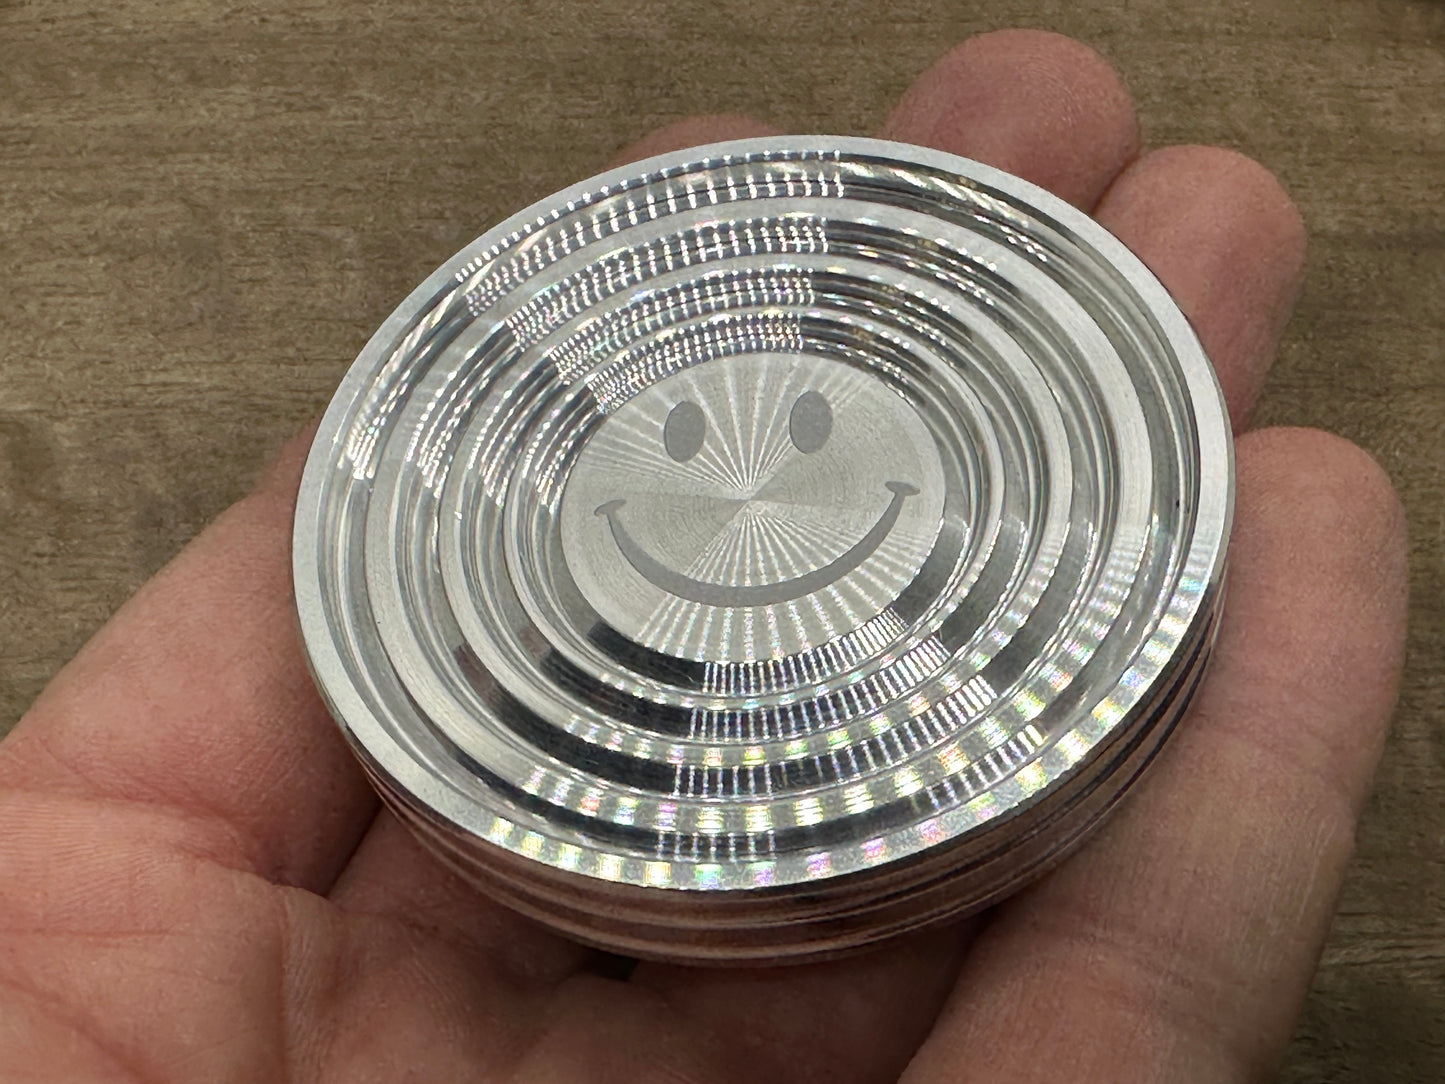 SMILEY Aerospace grade Aluminum Spin base for Spinning Tops & Coins